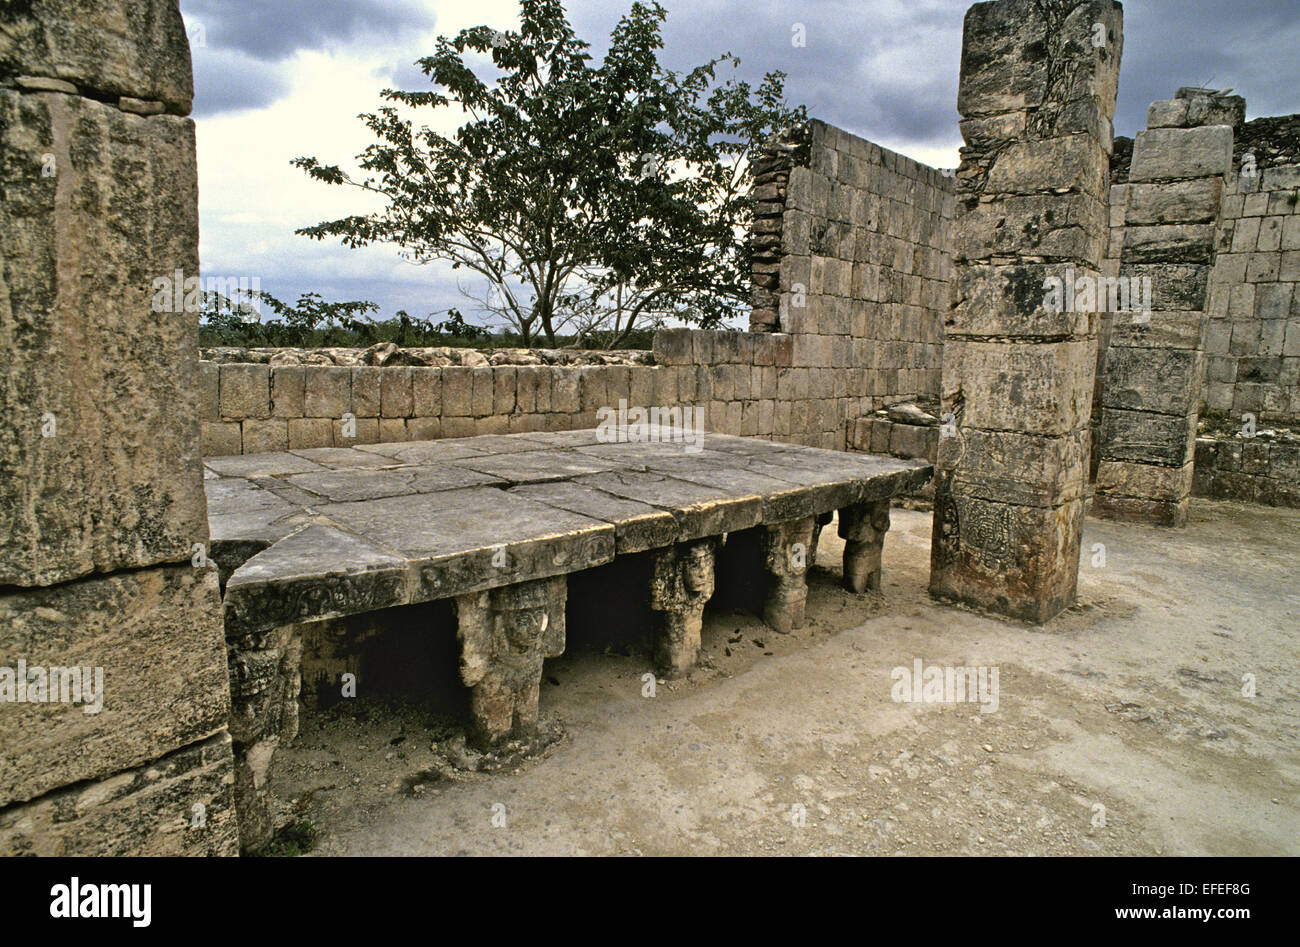 Mexico - Chichen Itza on of the best known sites. with well preserved and restorded buildings - this is the stone altar which stands at the back of the Temple of the Warriors Stock Photo